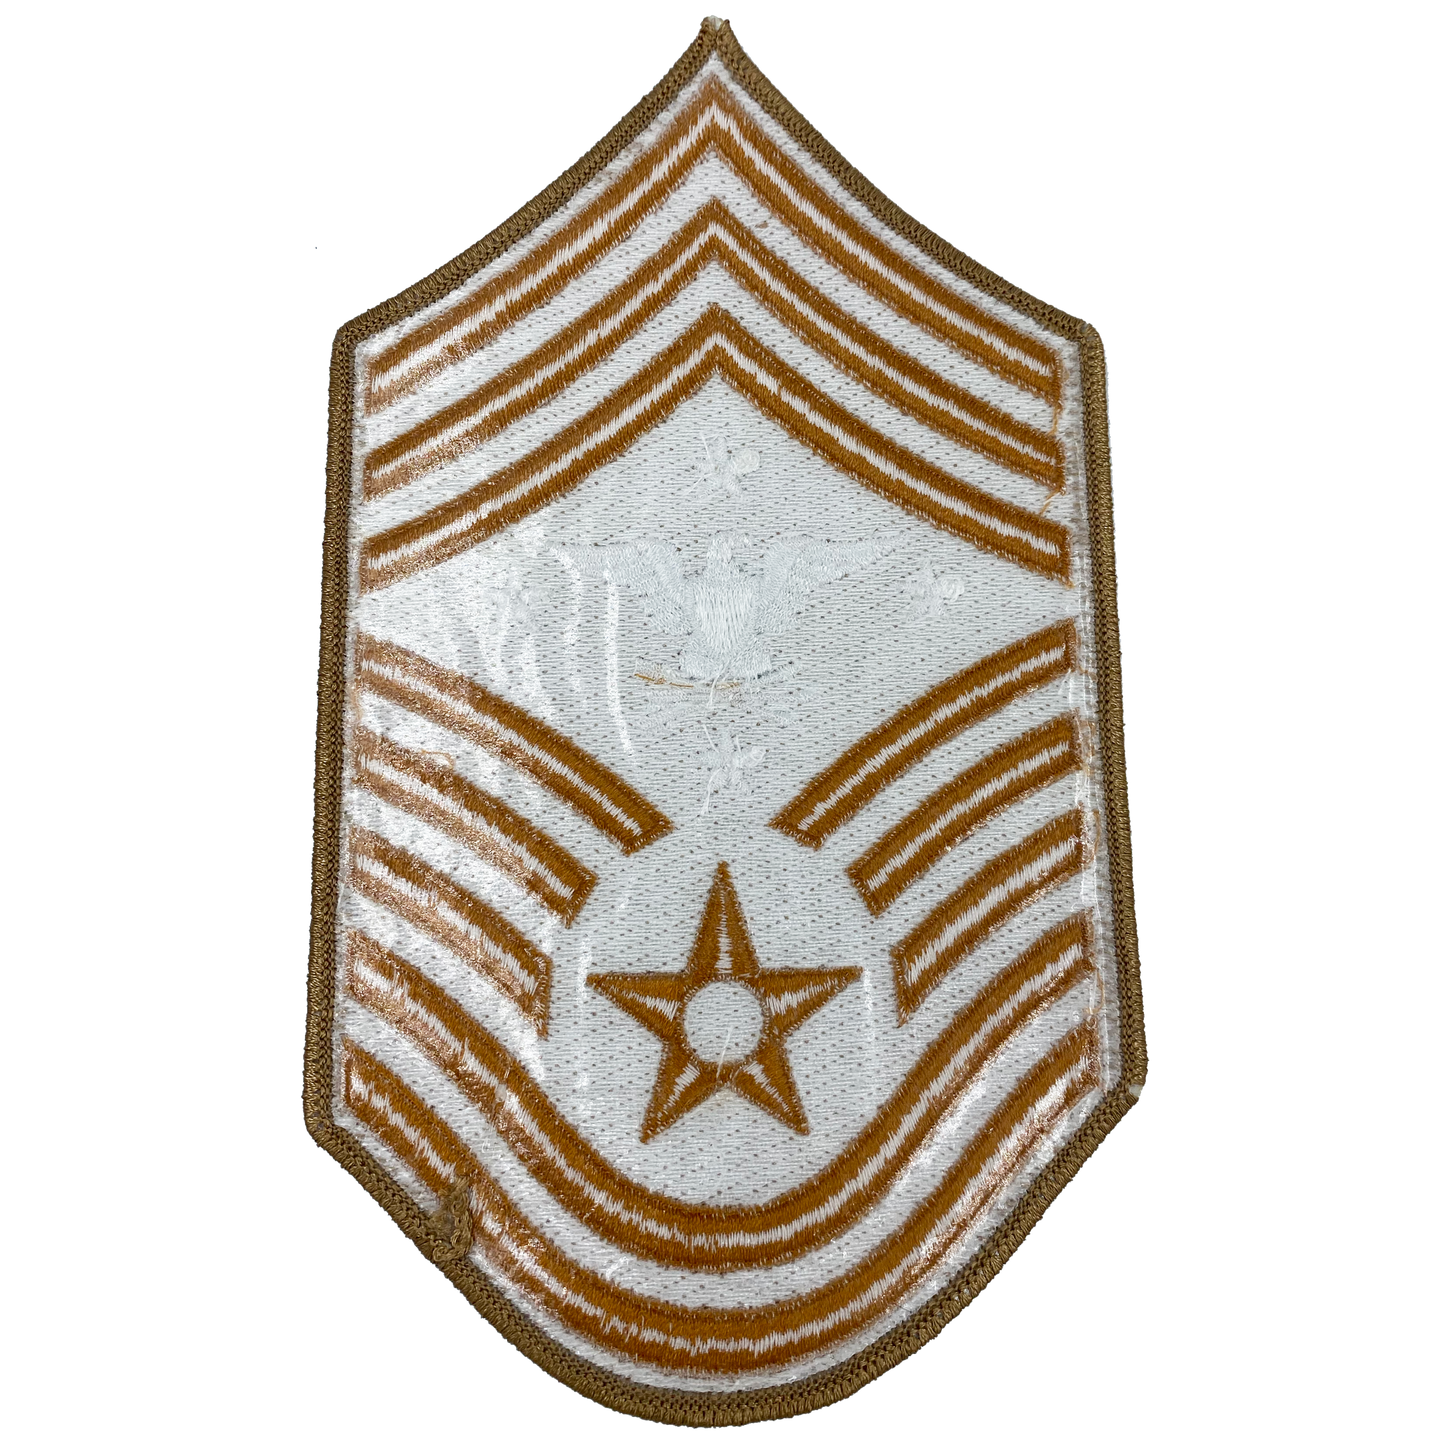 DL5-07 Senior Enlisted Advisor to the Chairman of the Joint Chiefs of Staff Air Force Senior Enlisted Advisor Chief Master Sergeant Desert Camo Rank (Right facing Eagle) USAF Patch 